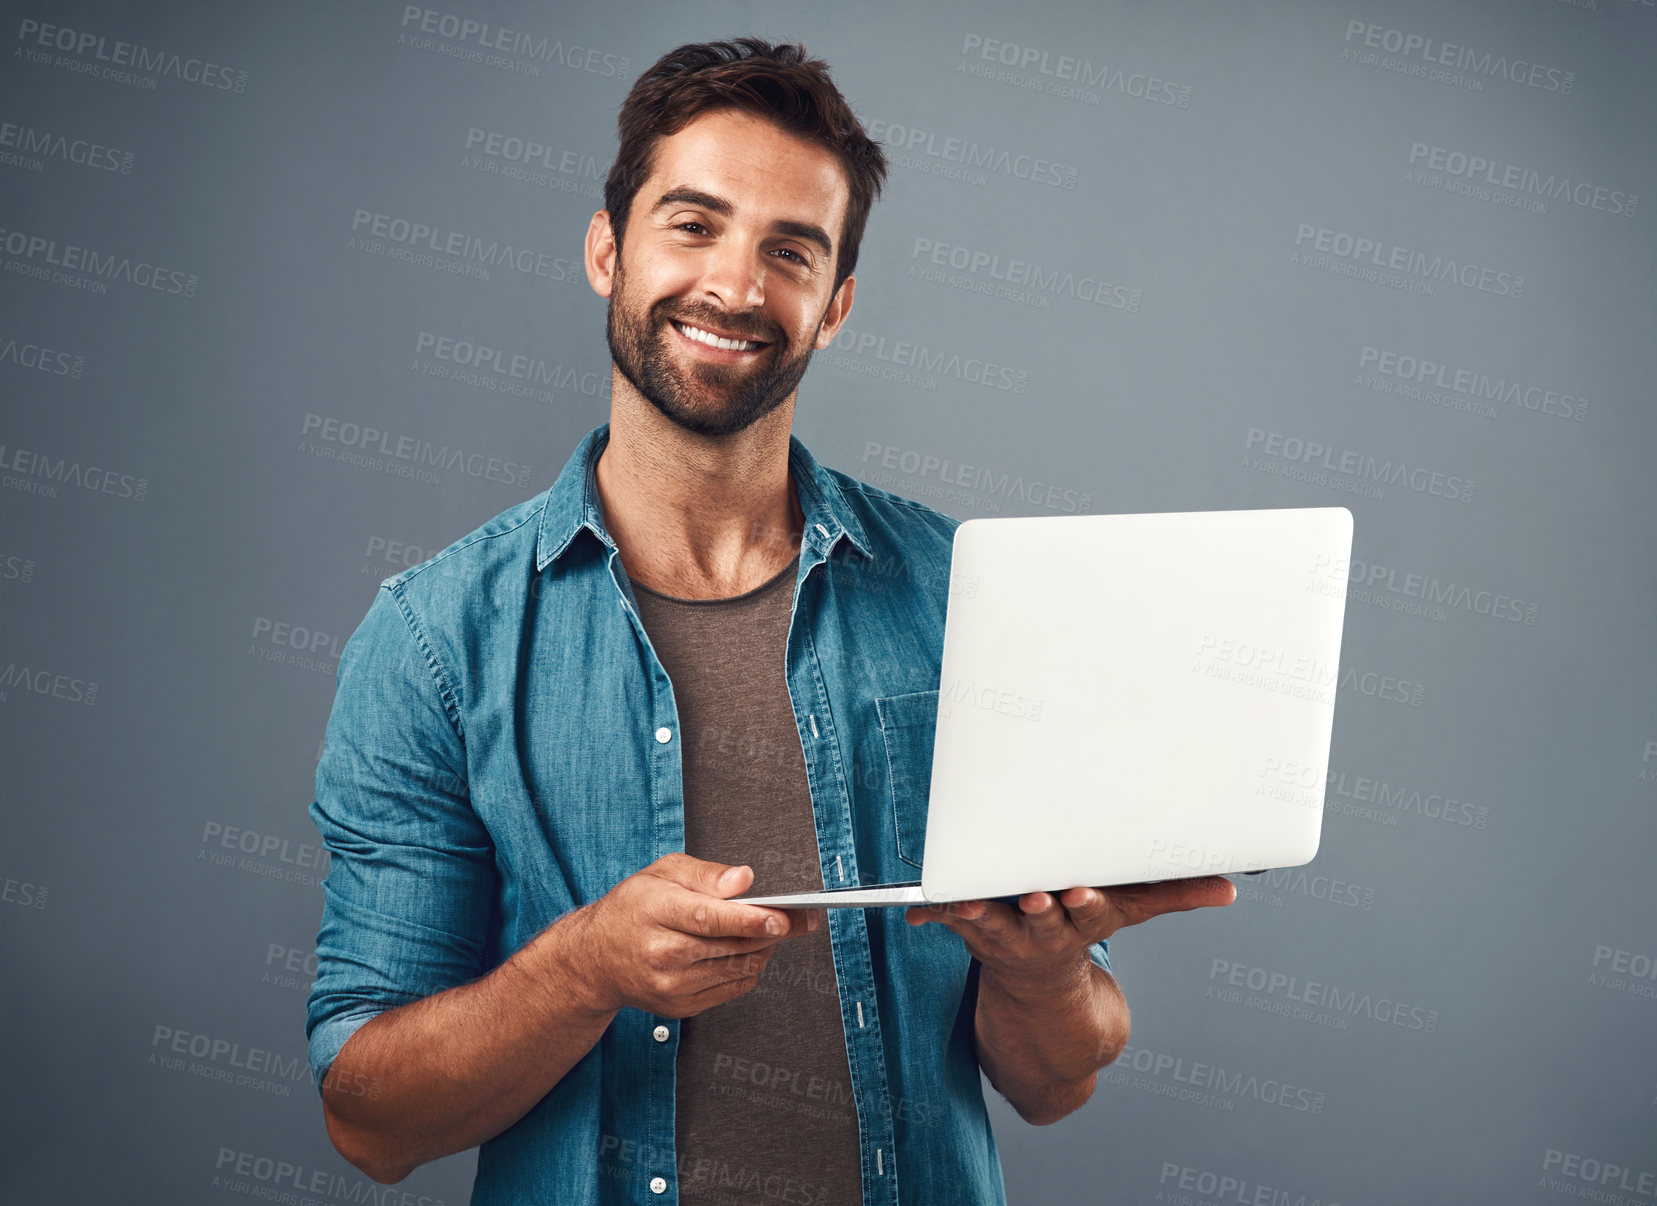 Buy stock photo Studio shot of a handsome young man using a laptop against a grey background